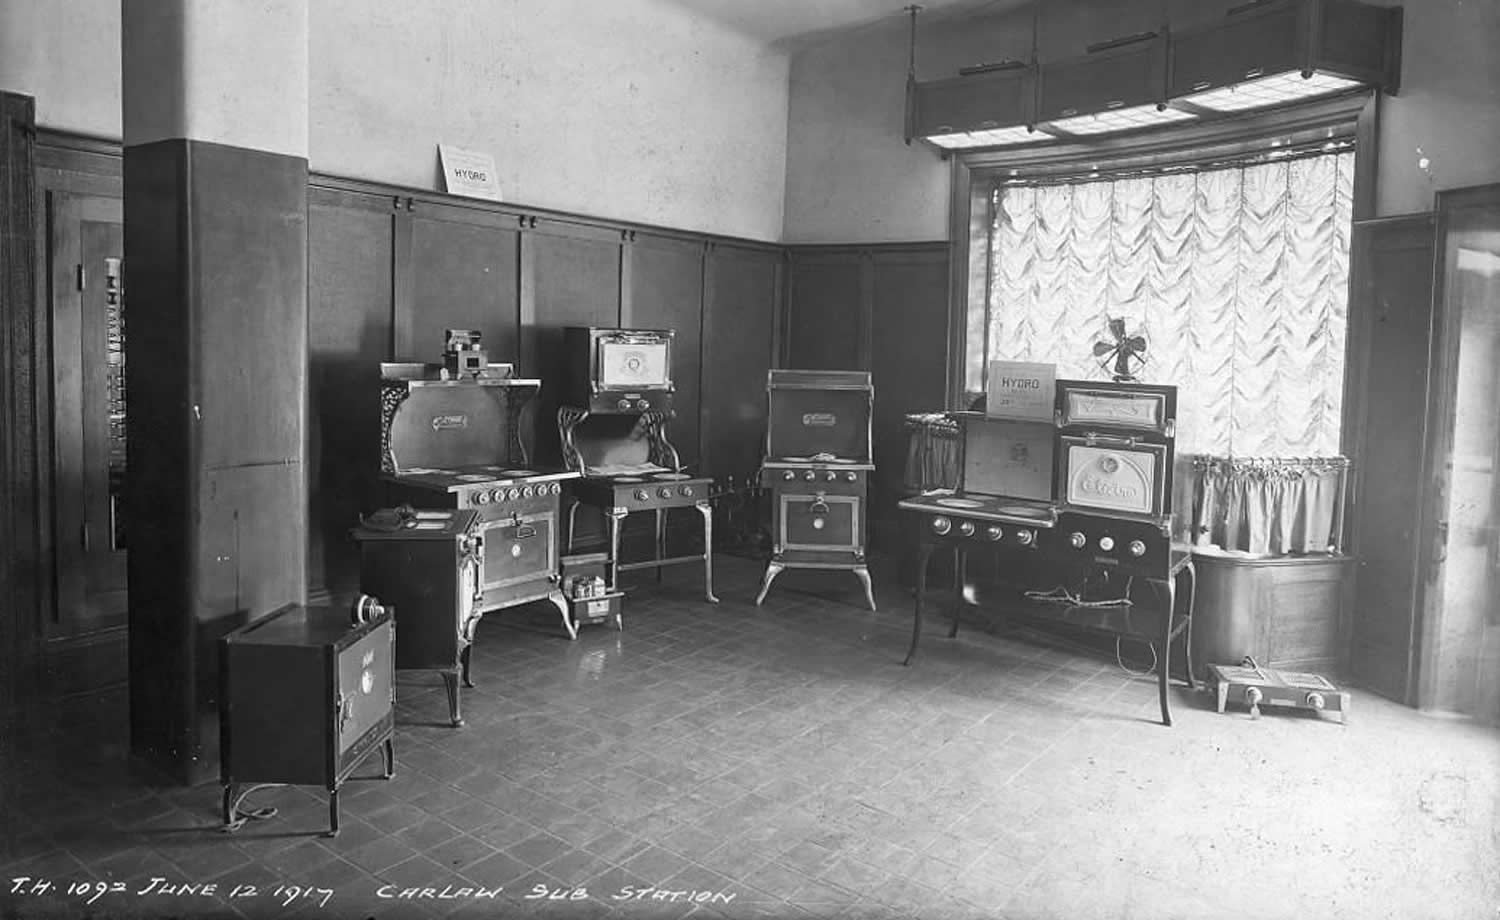 Black and white photograph of a store with early electric stoves on display.